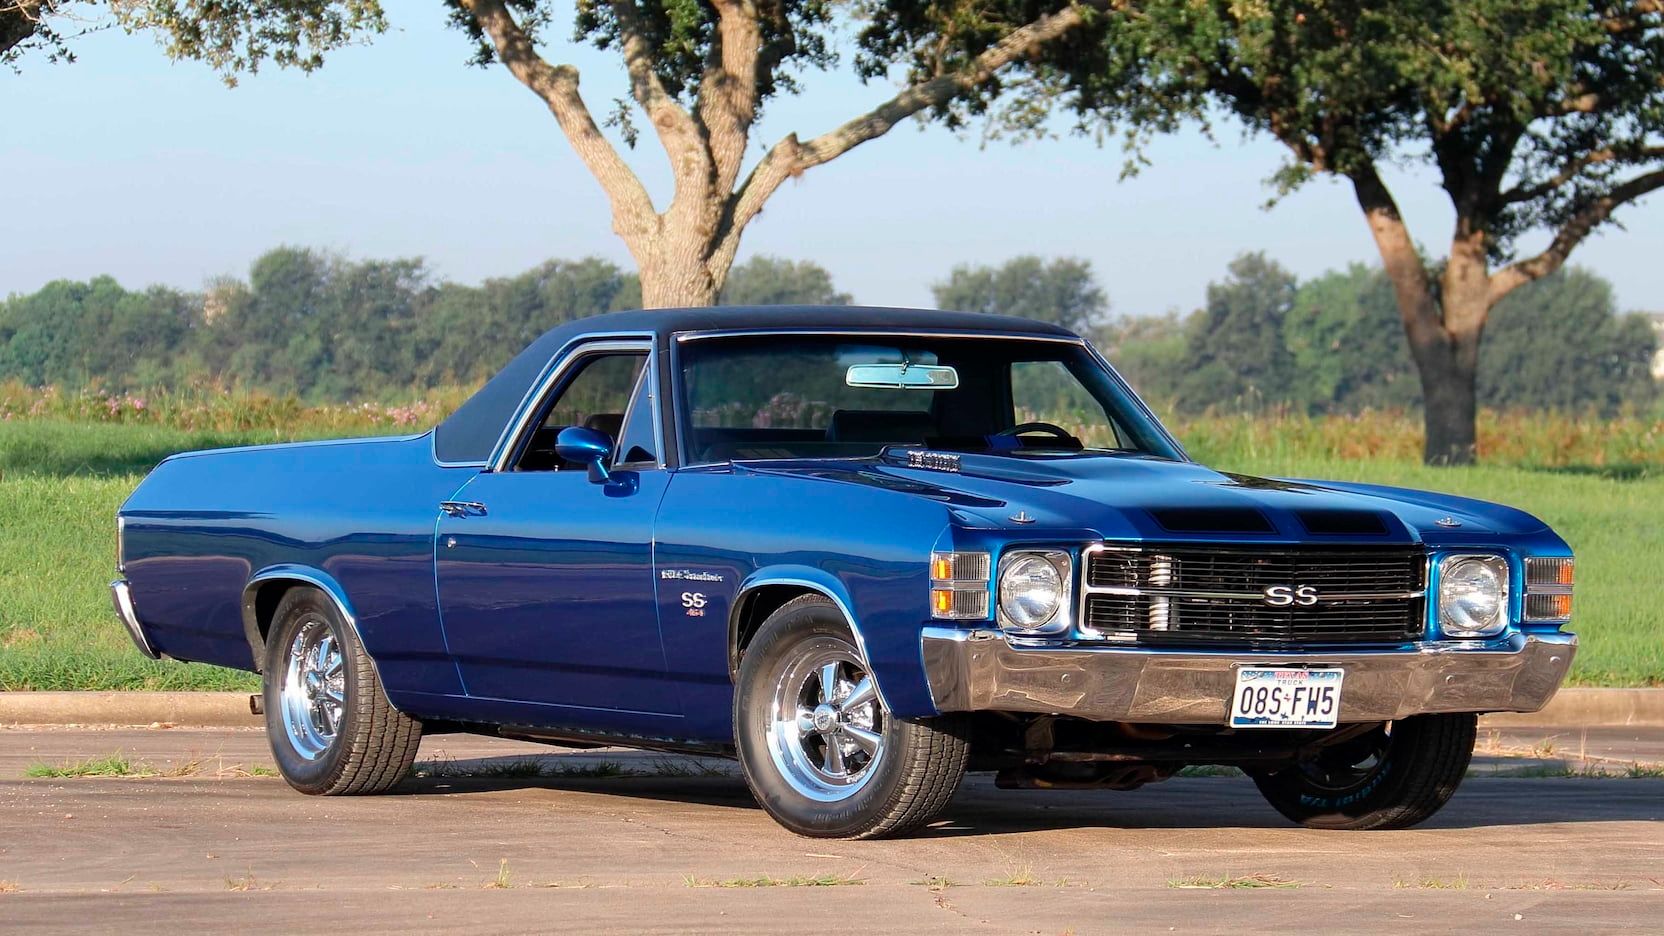 A parked blue 1971 Chevy El Camino SS